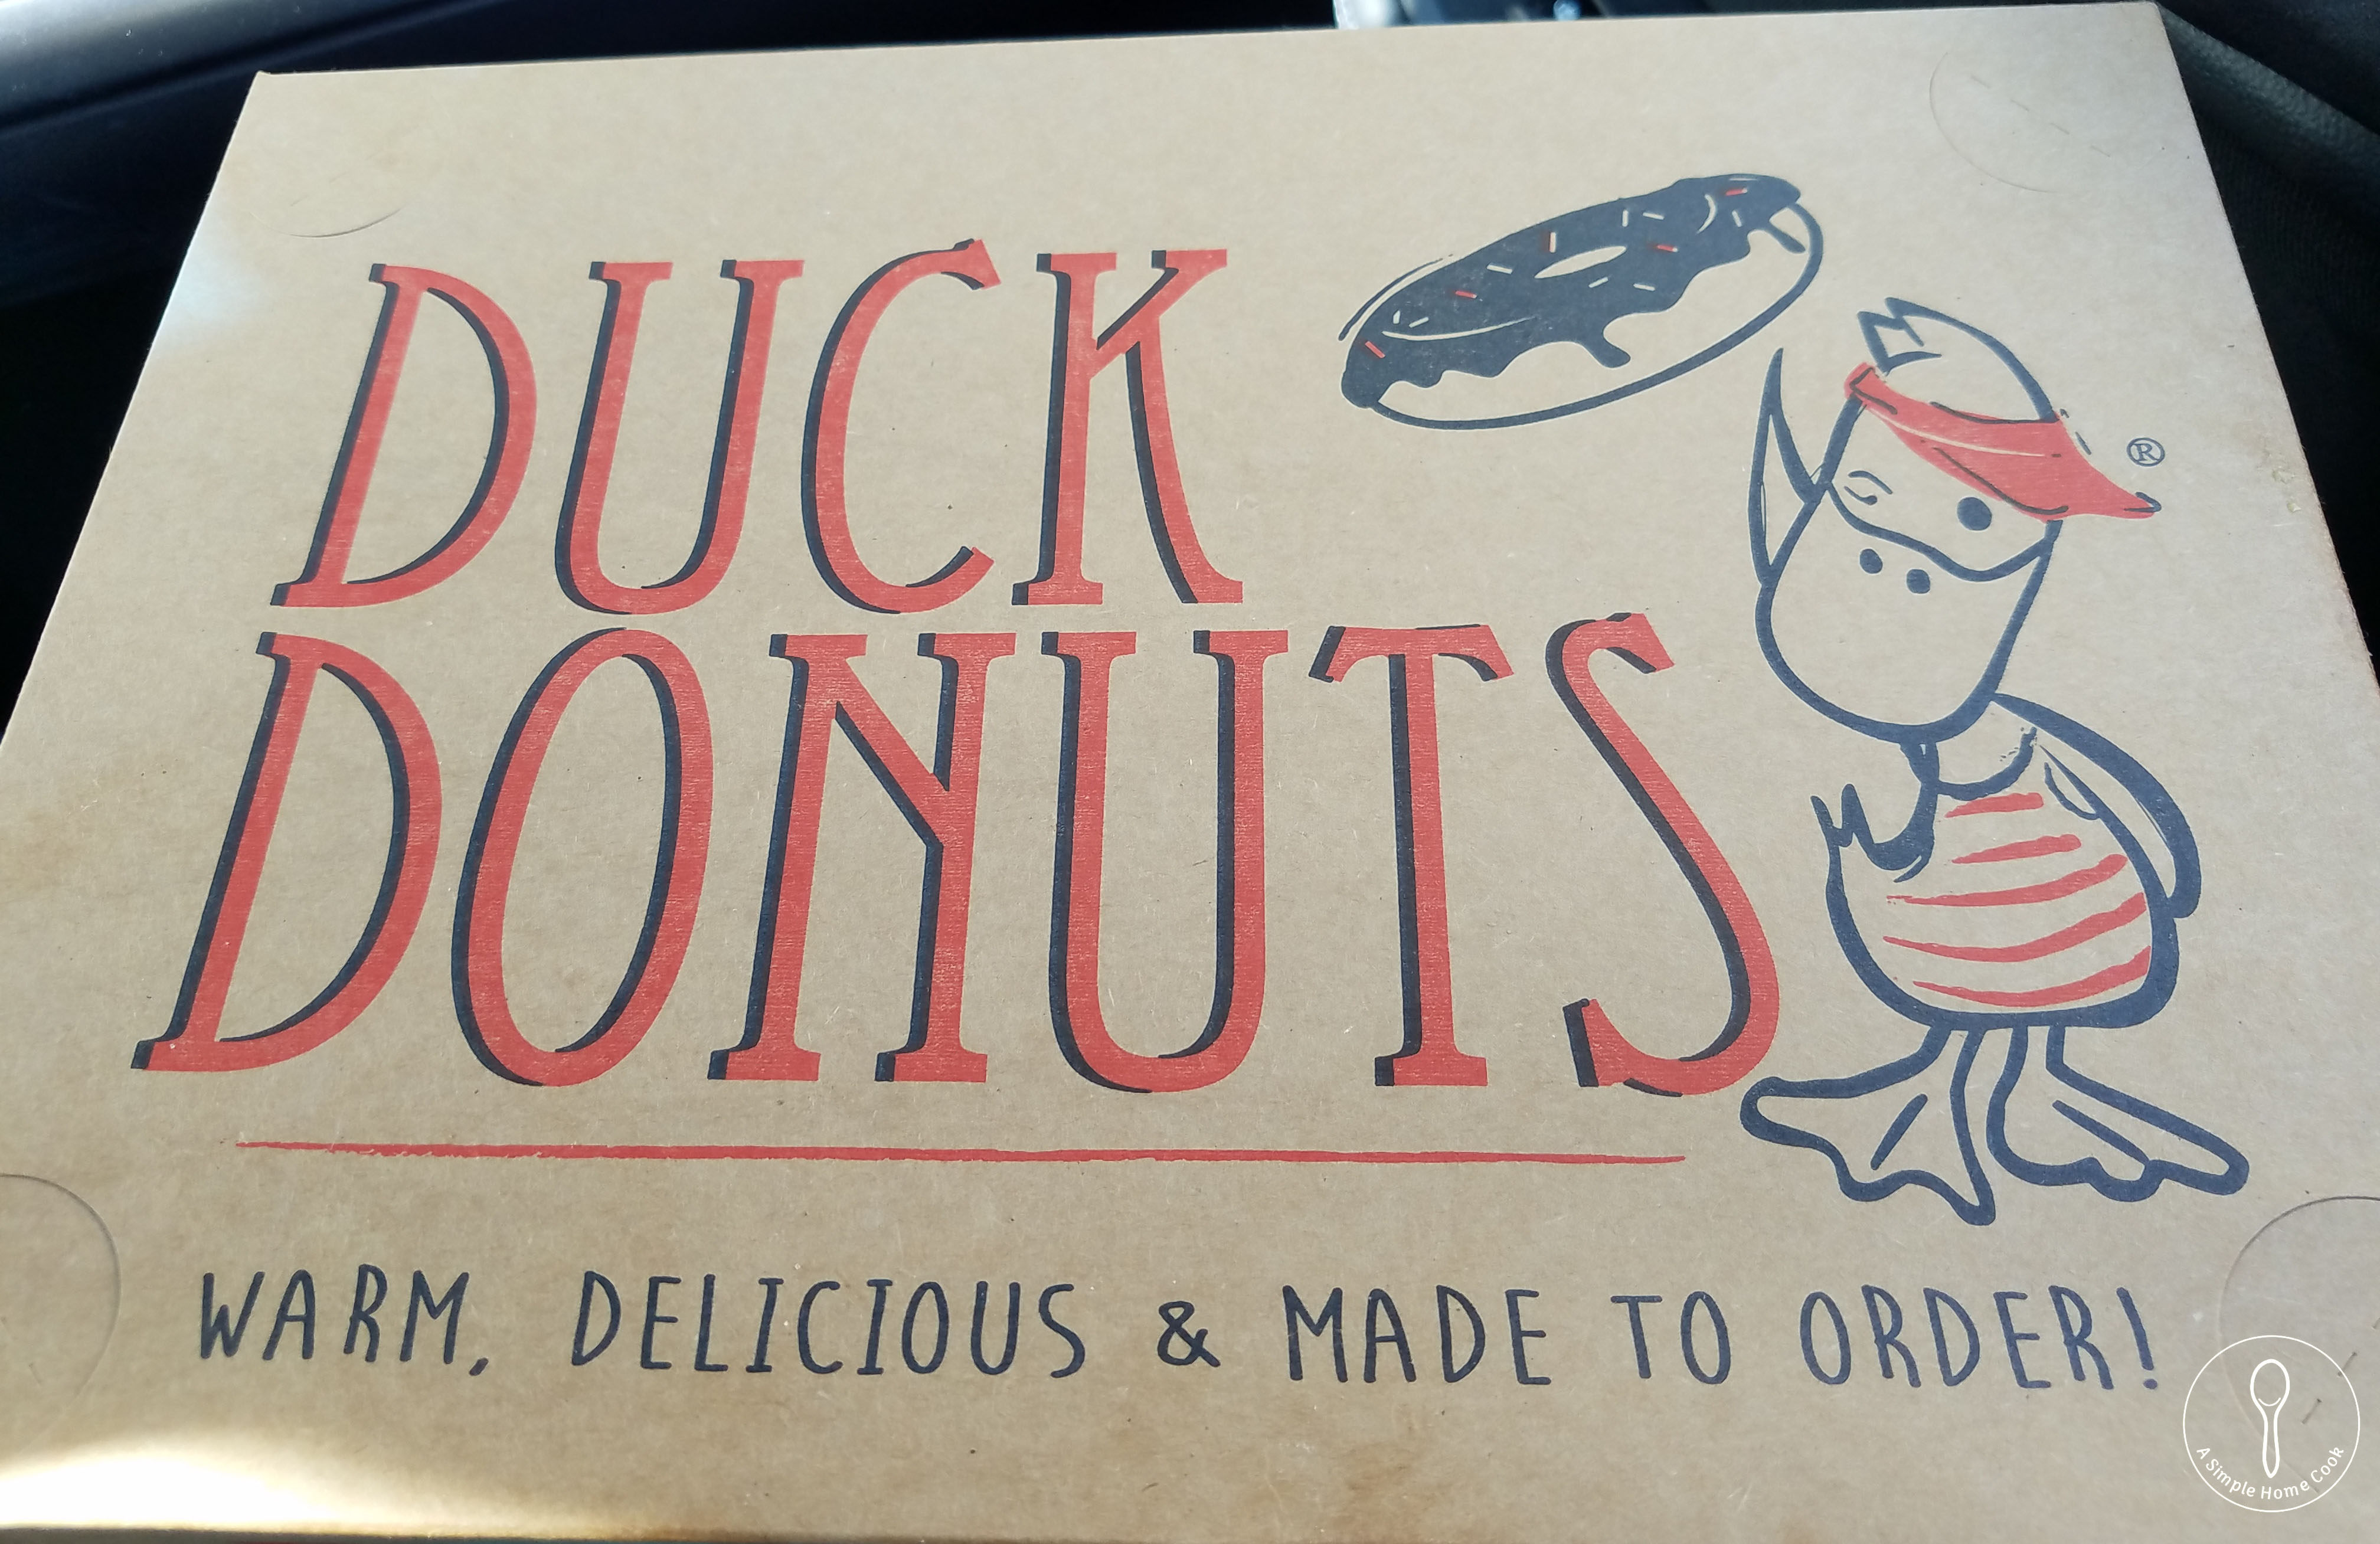 Duck Donuts Bos Top